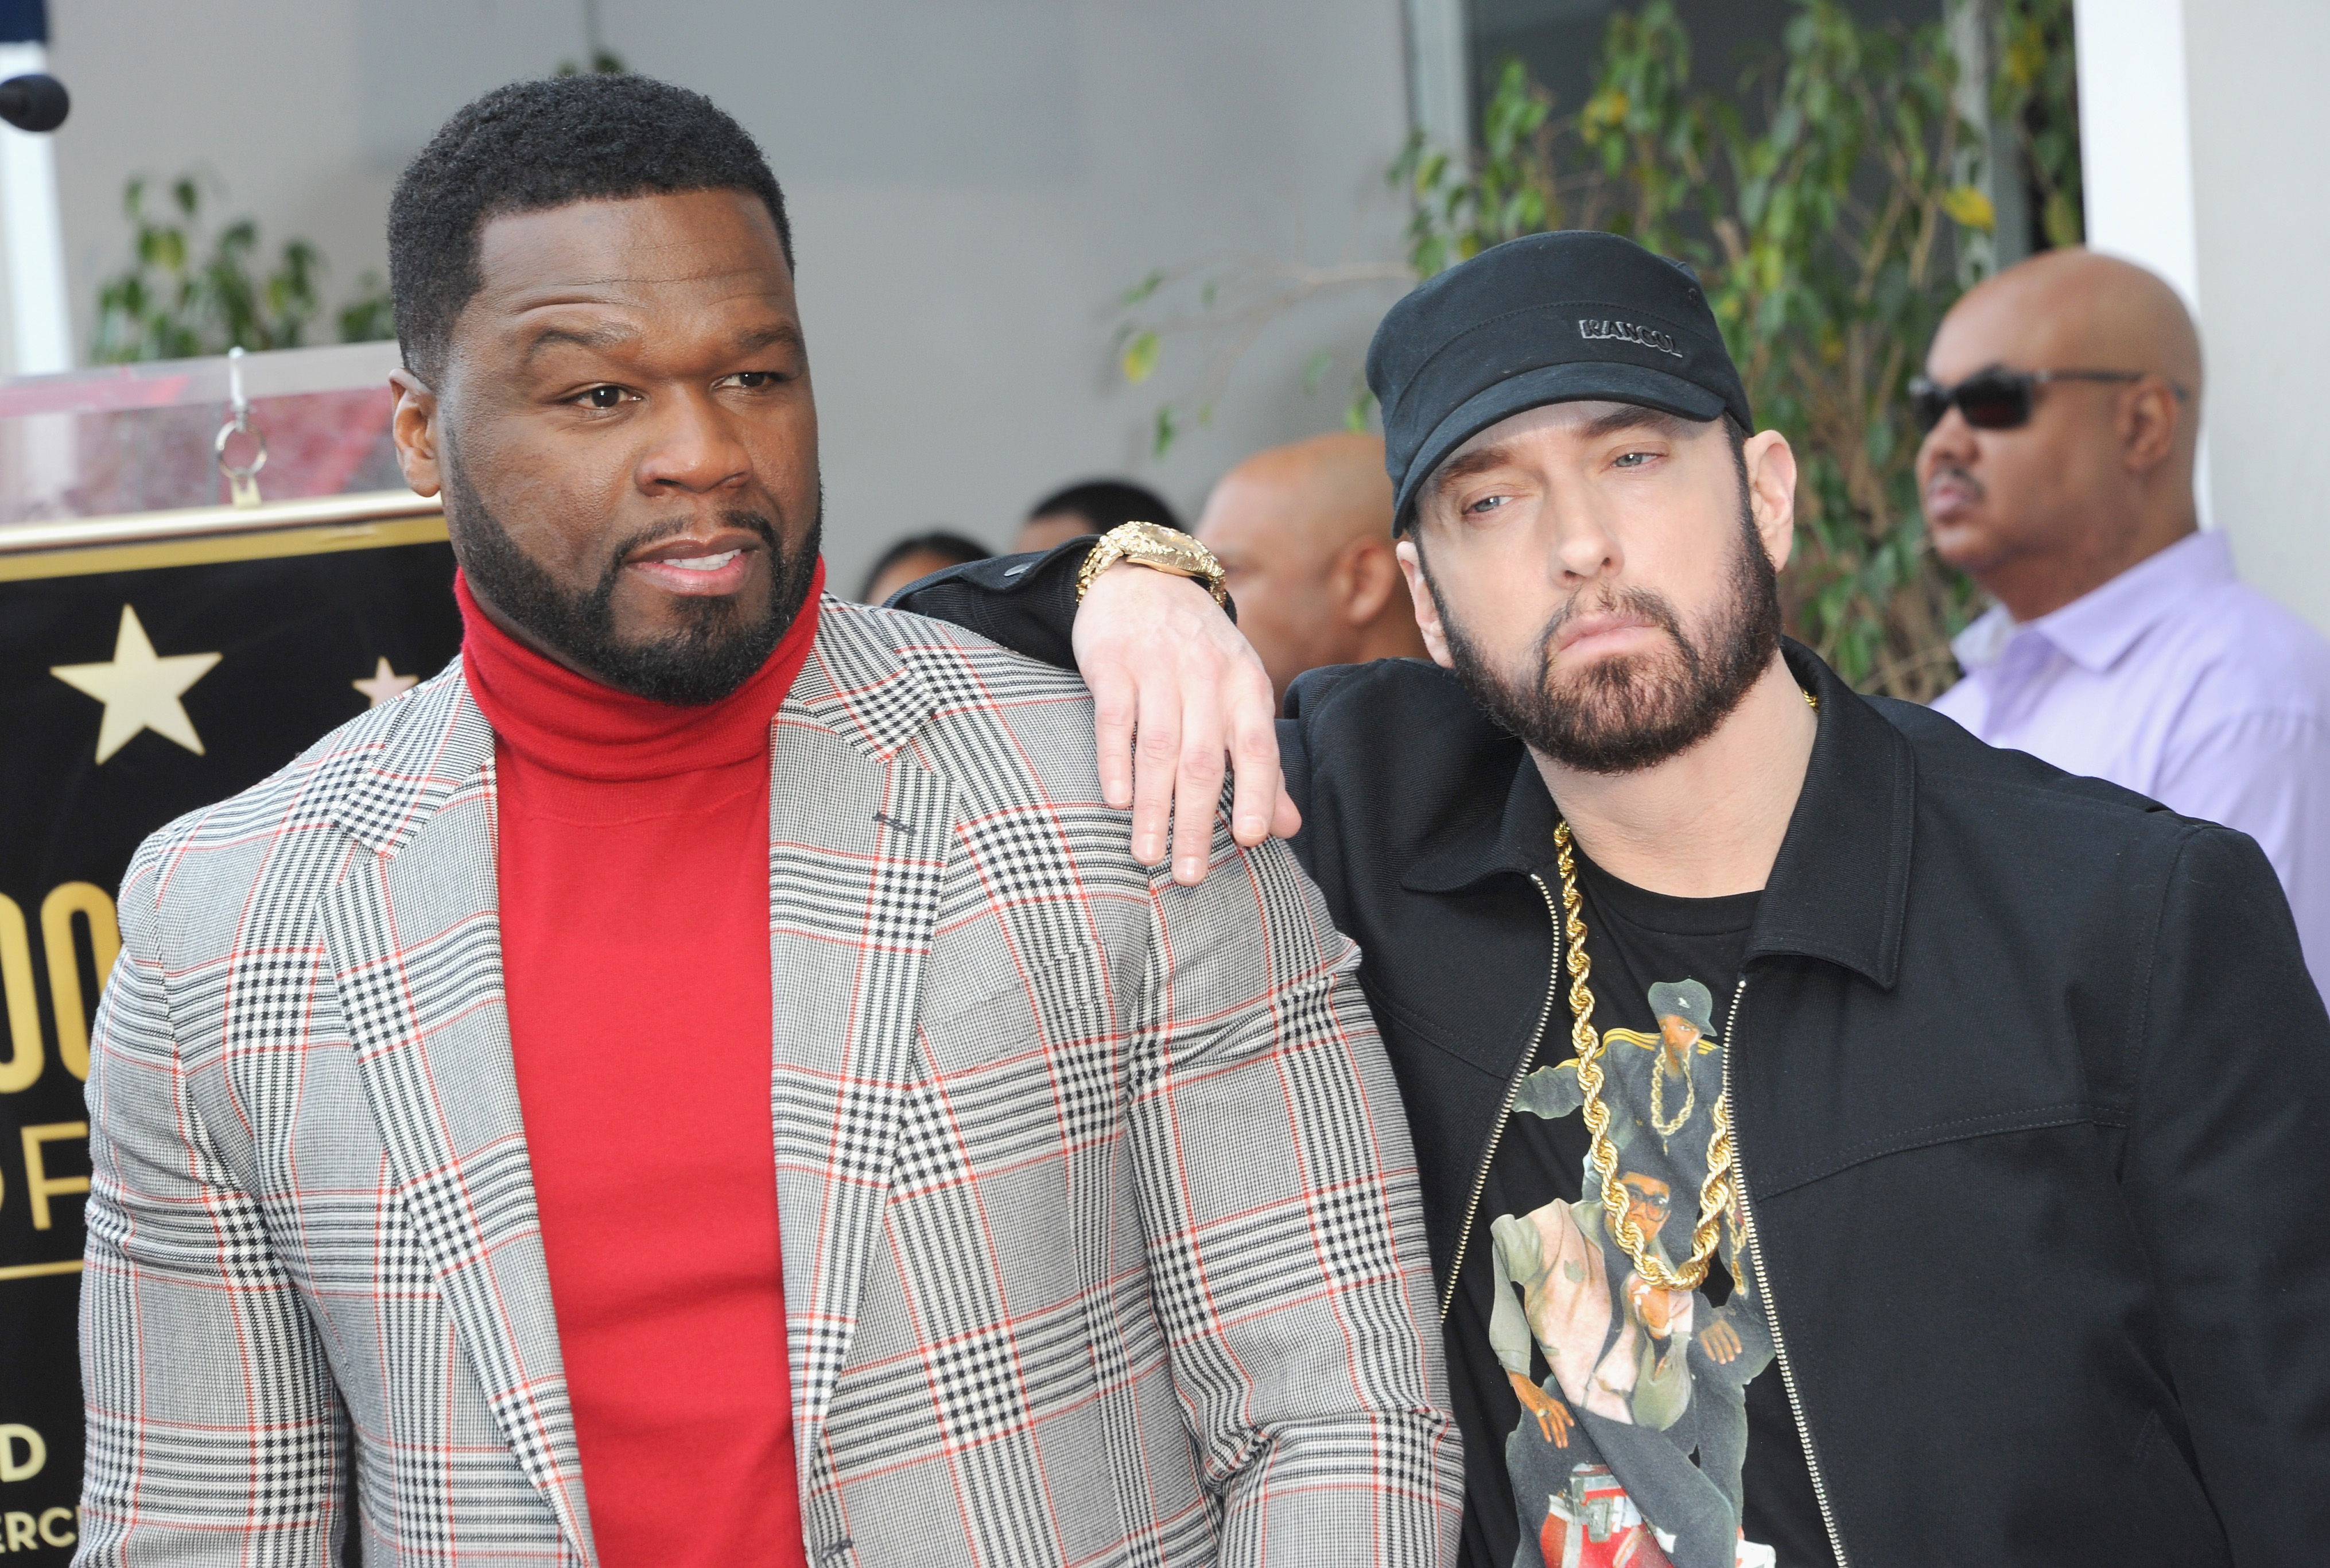 50 Cent and Eminem take a photo together at a ceremony honoring 50 with a star on the Hollywood Walk of Fame